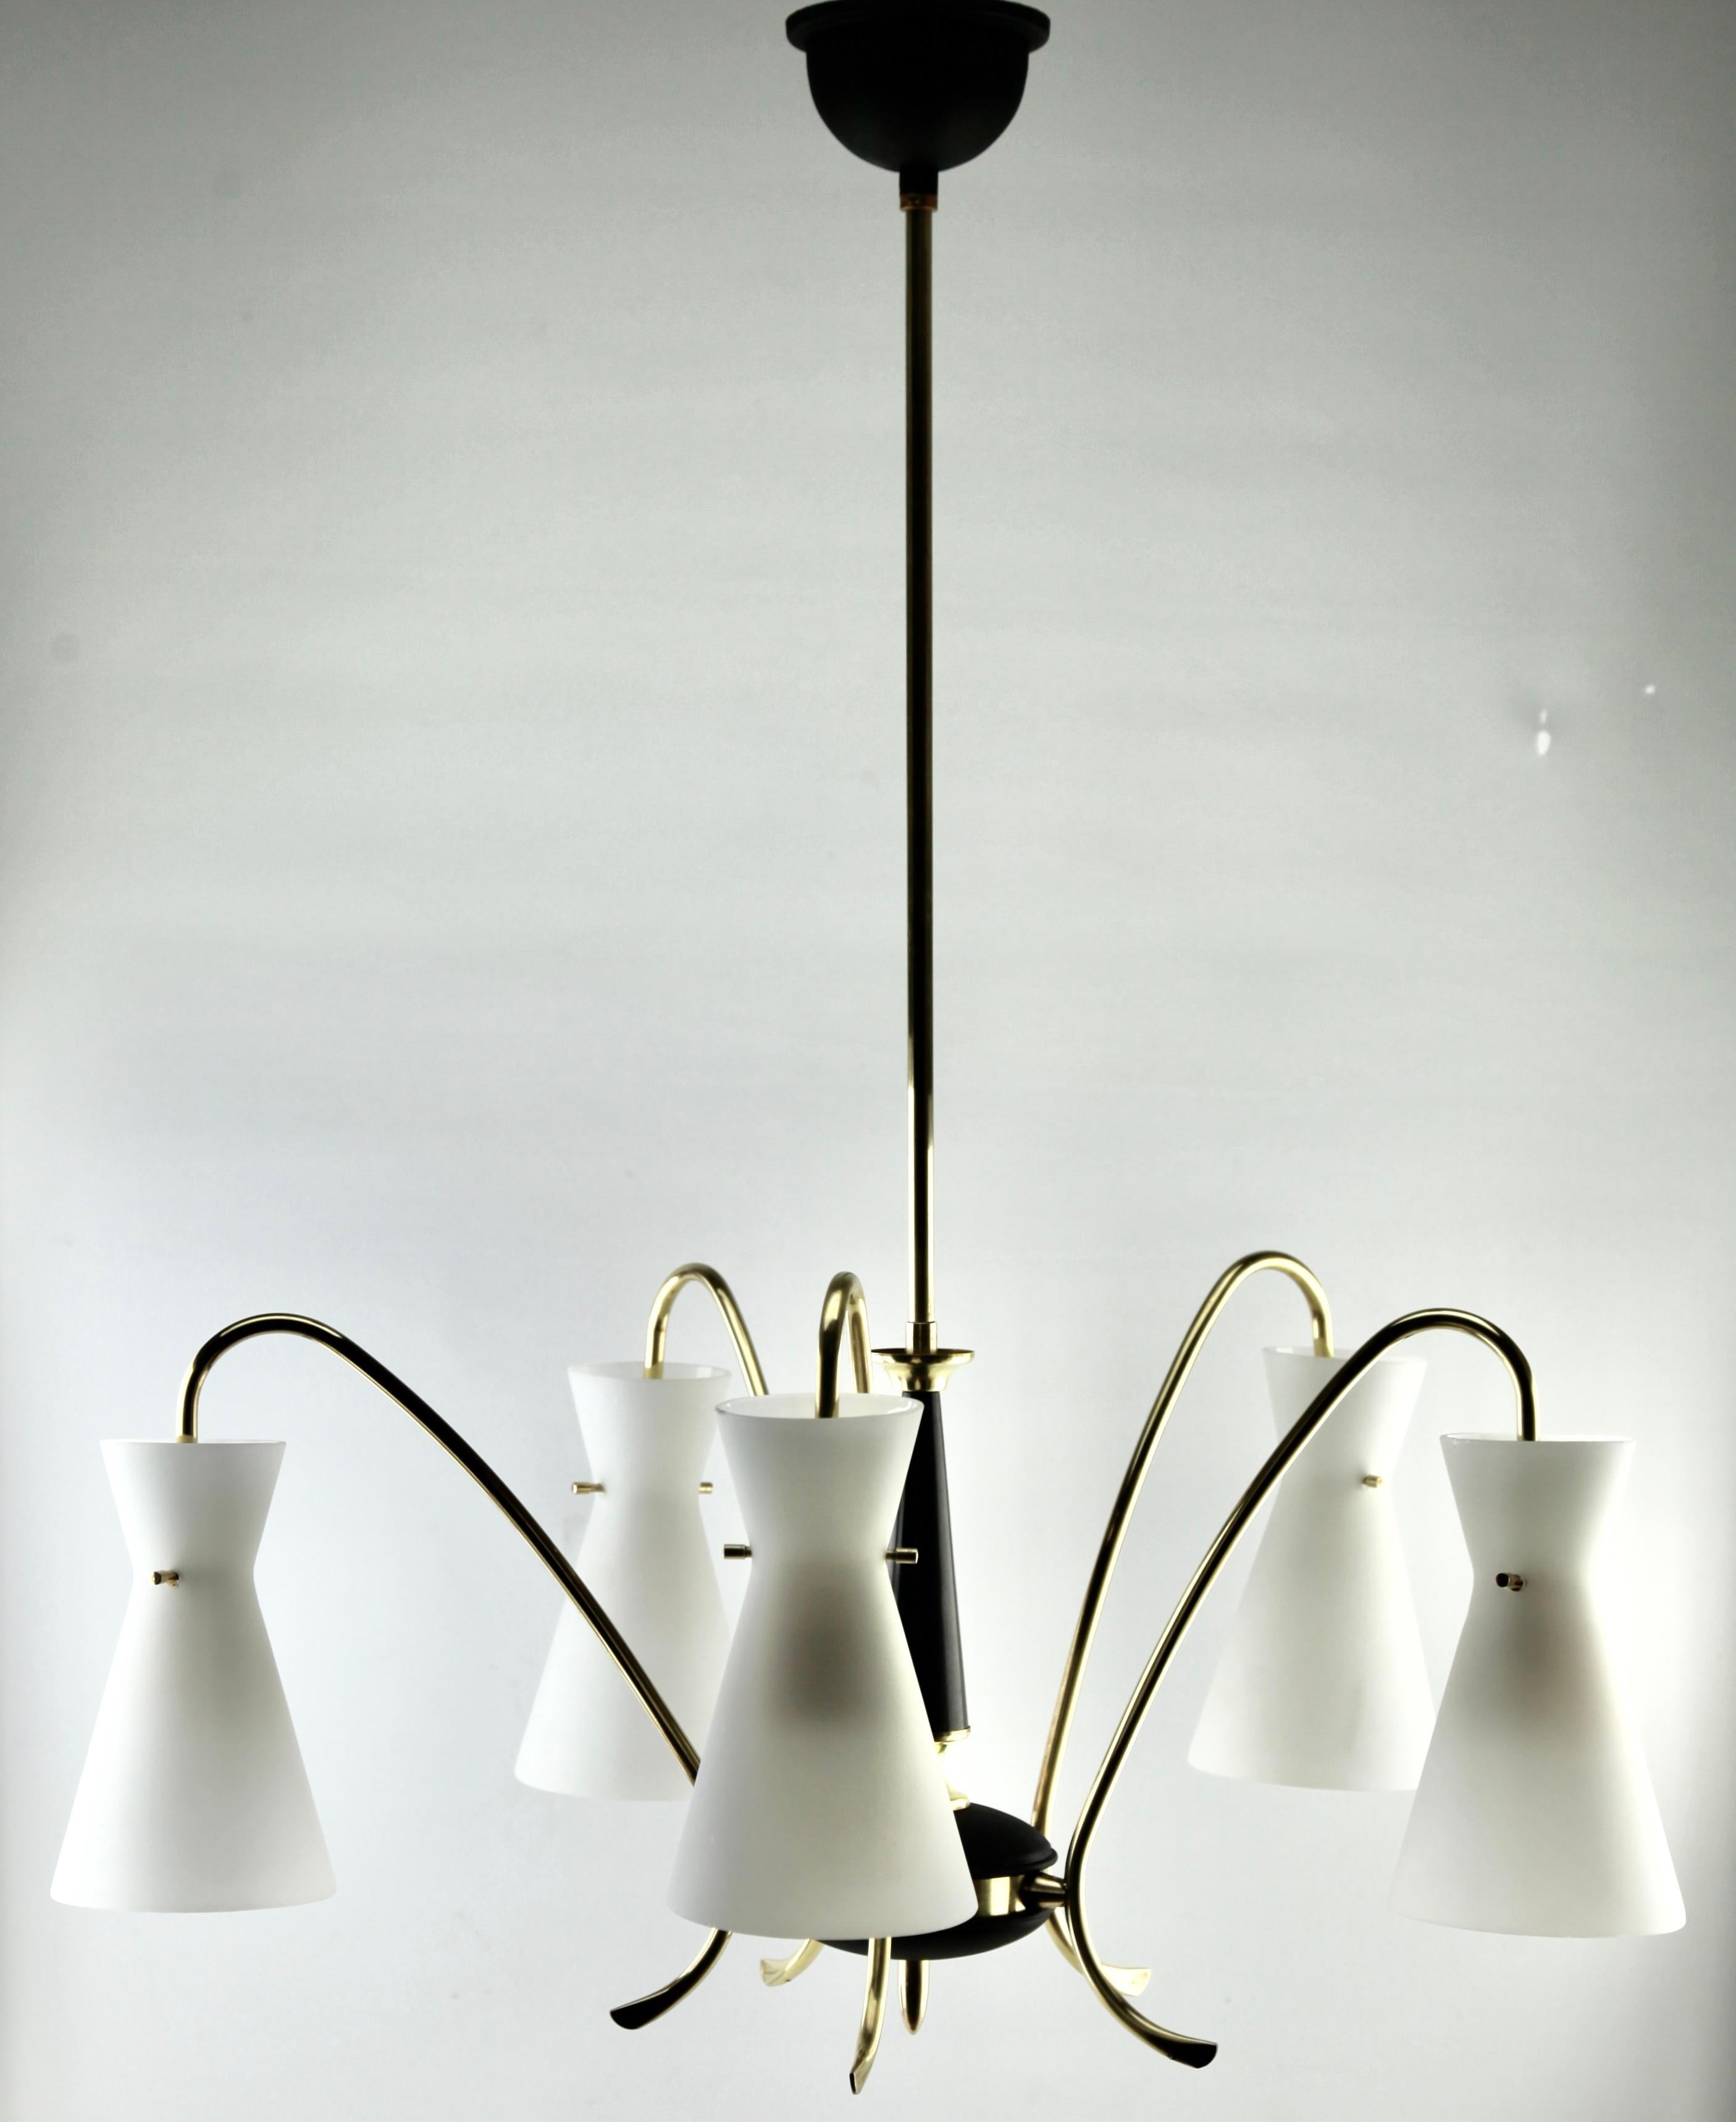 5 arms chandelier style of Stilnovo. Model Diablo
Photography fails to capture the simple elegant illumination provided by this lamp.

Recently cleaned and polished so that it in excellent condition and in full working order 
has also been